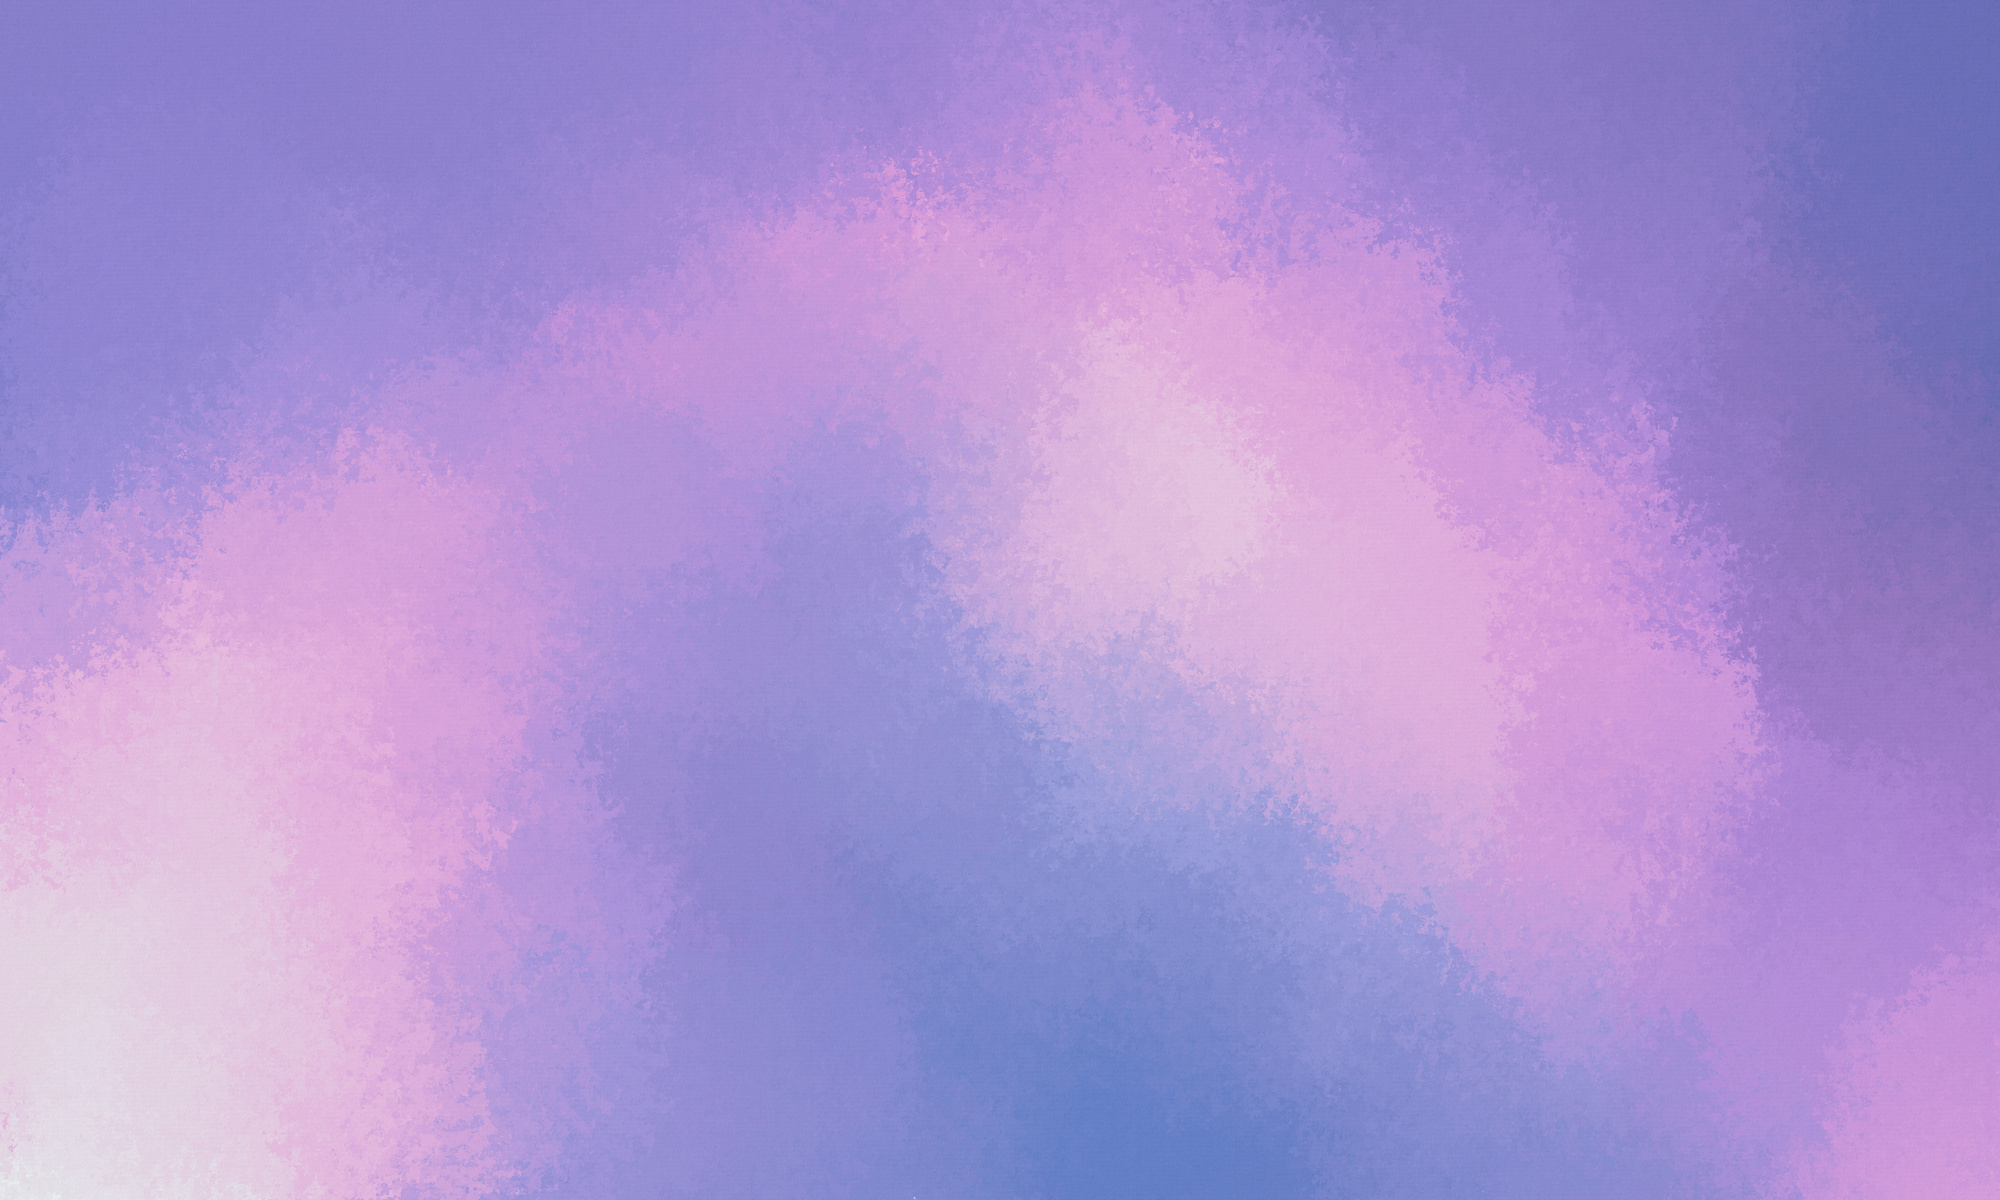 Dreamy fuzzy textured background, calming nostalgic colorful backdrop, handpainted watercolor. Unicorn vibes, vaporwave pink purple and blue wallpaper.